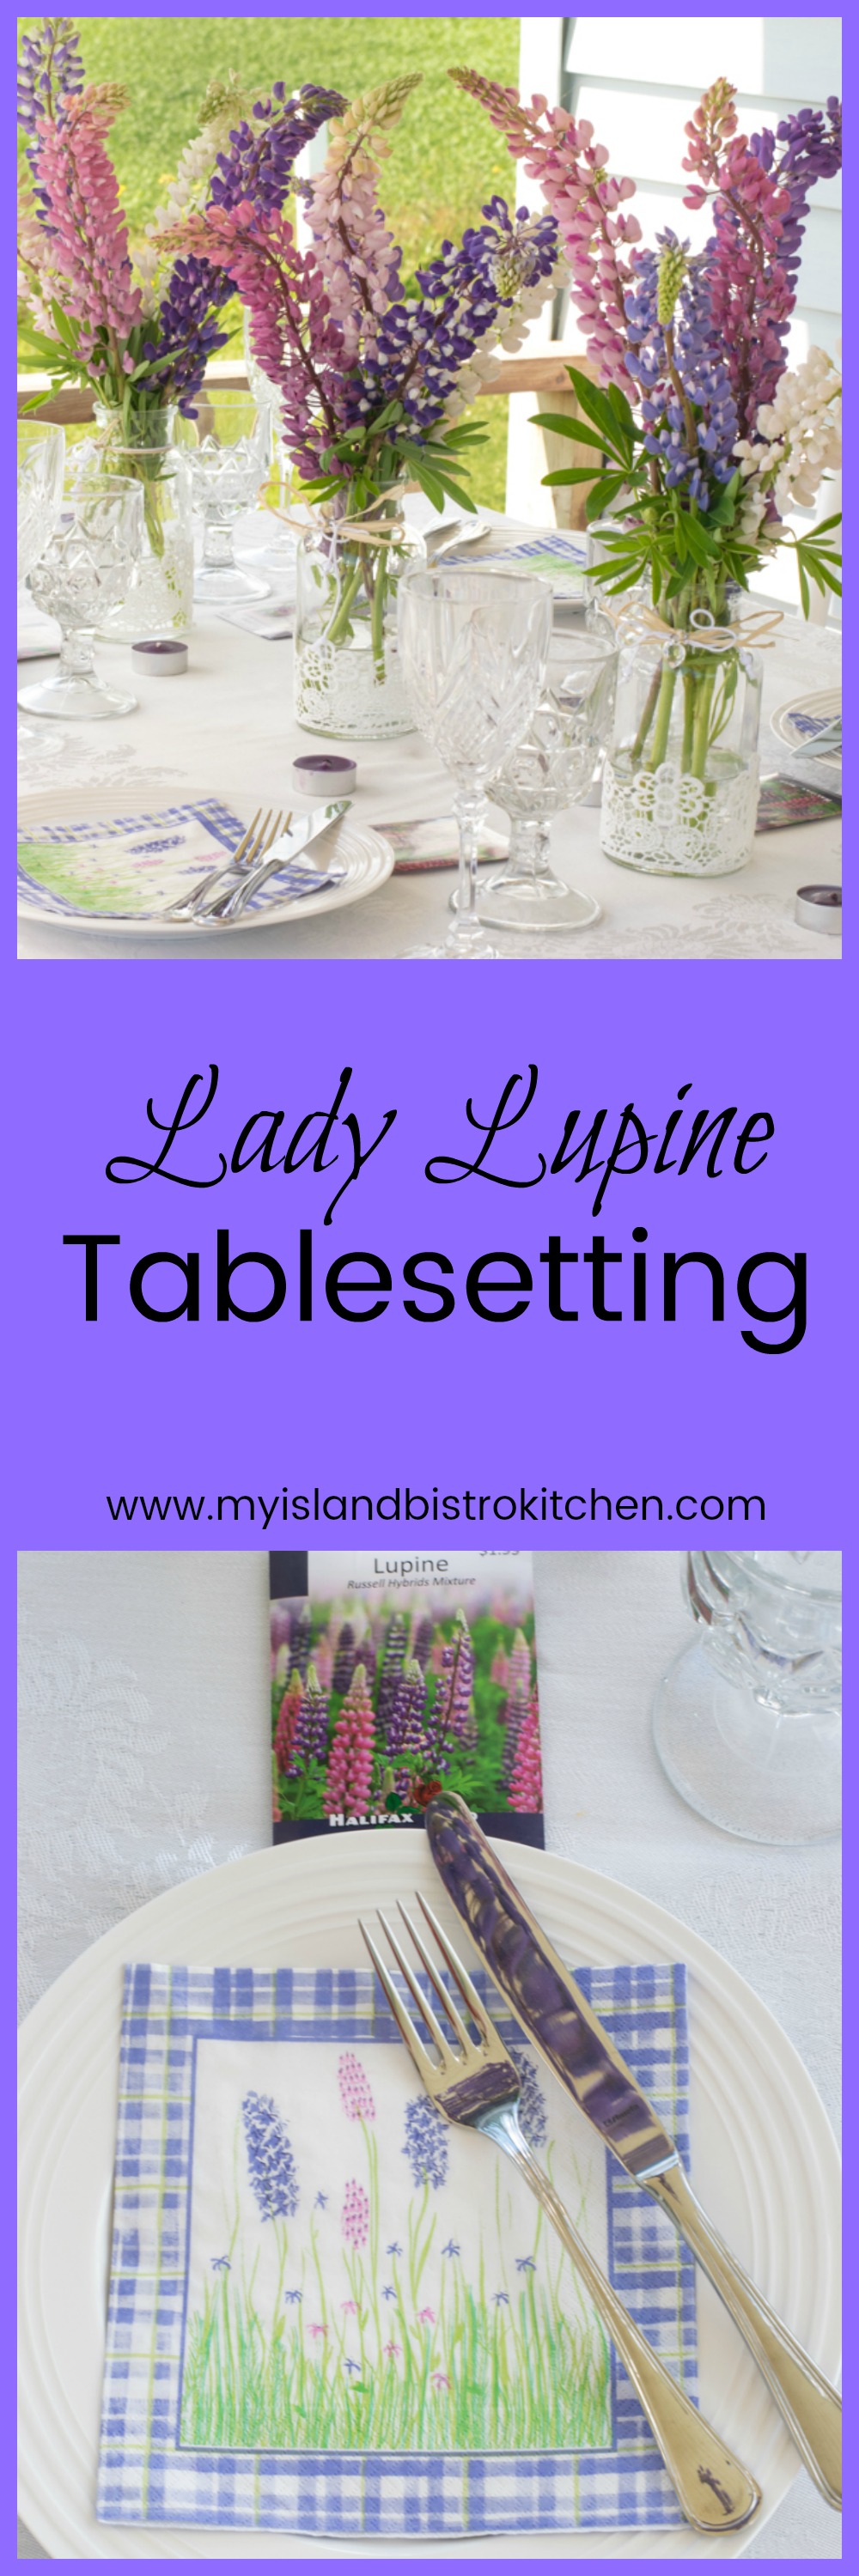 Lady Lupine Tablesetting